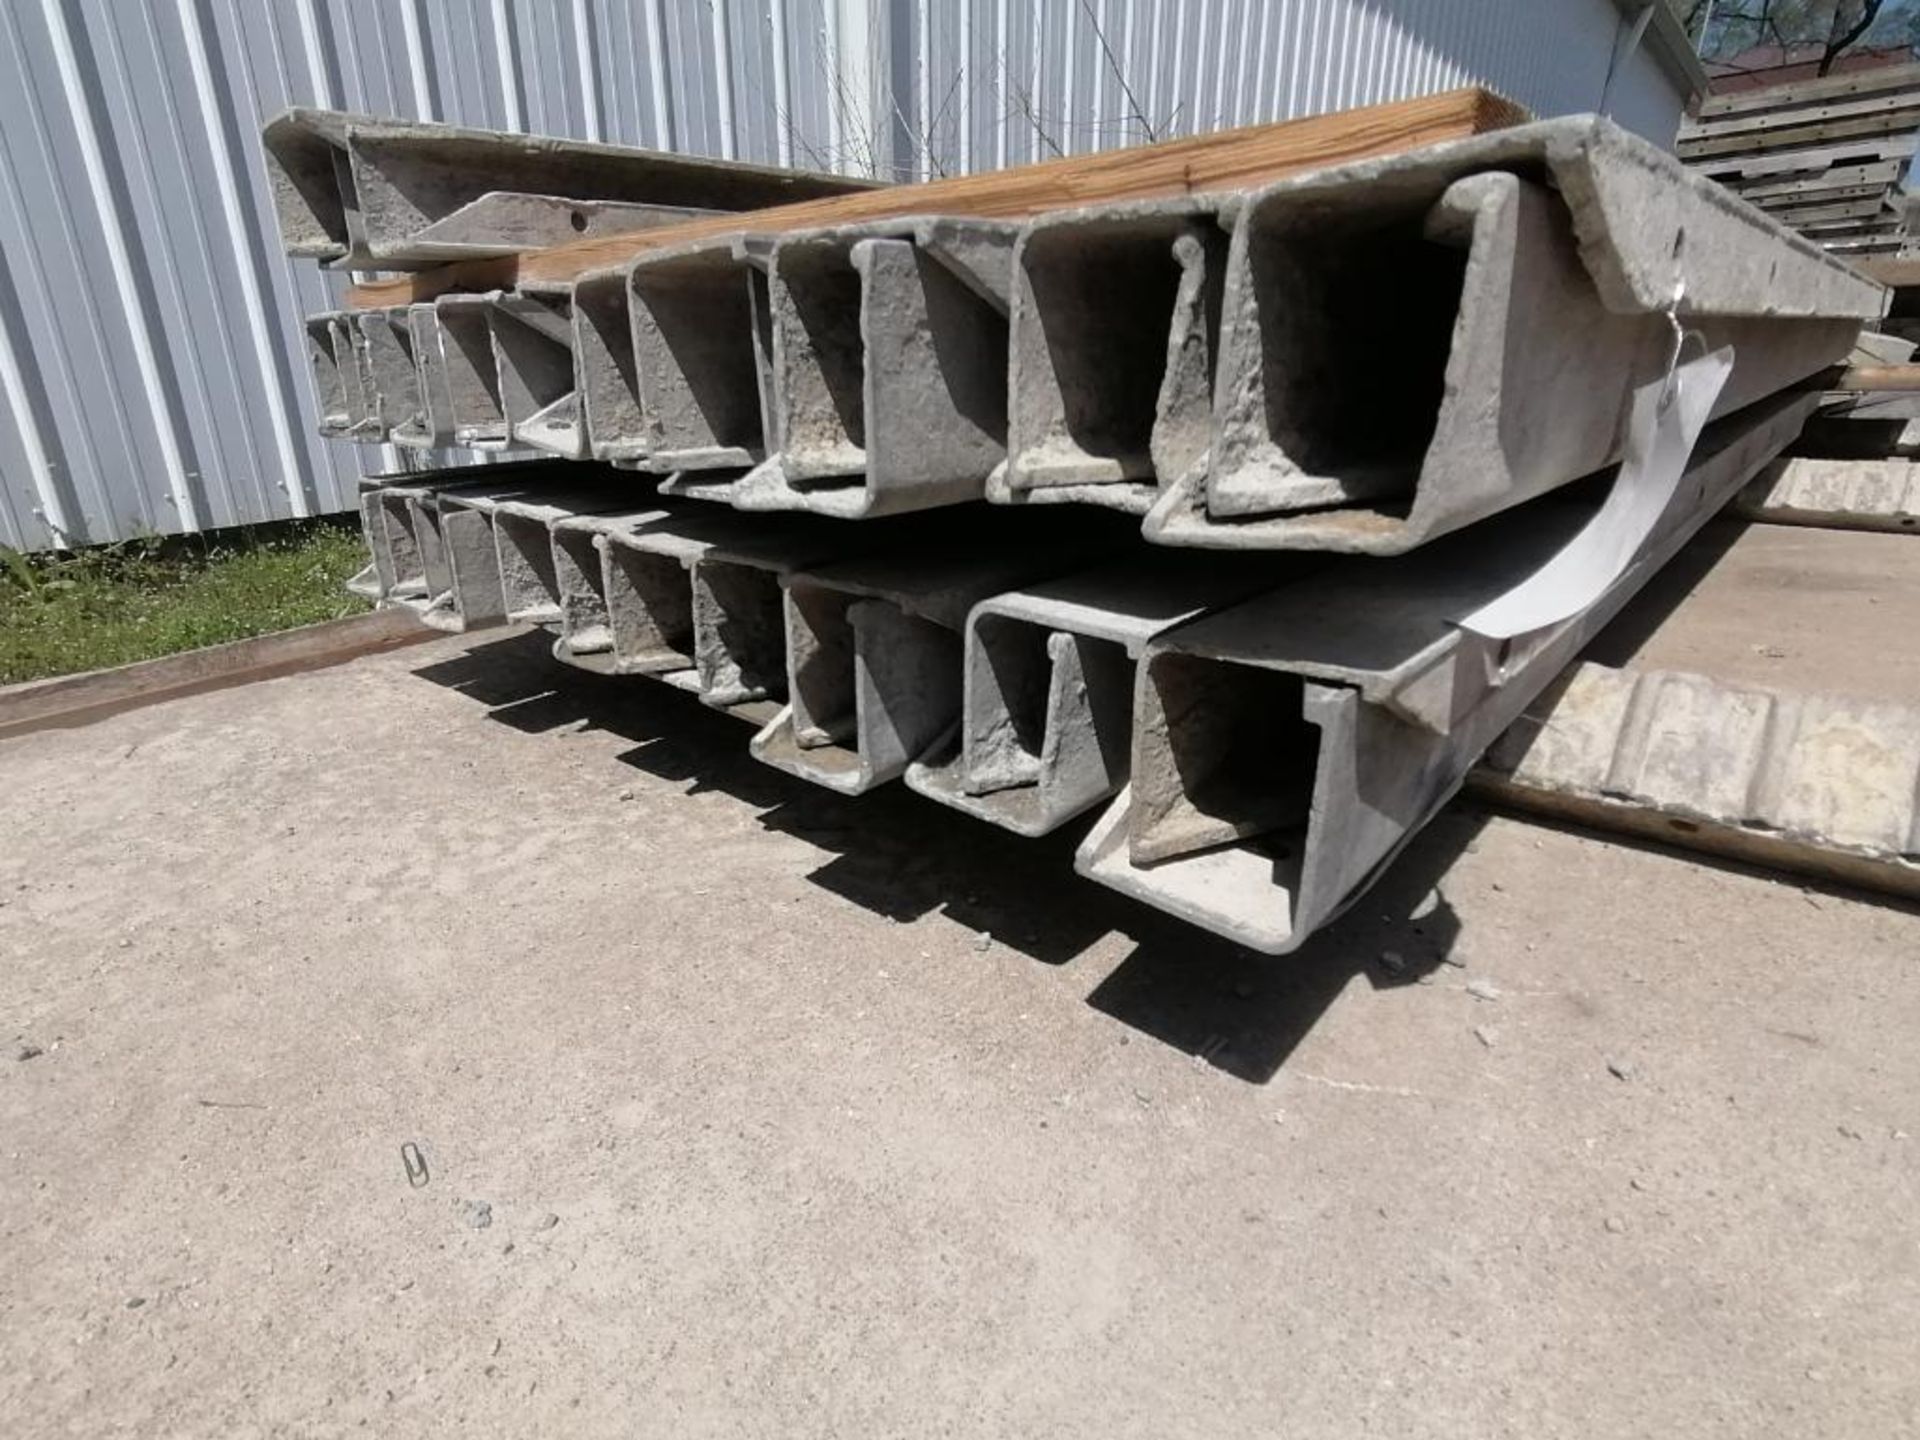 (10) 4" x 4" x 8' Wall-Ties Smooth Aluminum Concrete Forms 6-12 Hole Pattern. Located in Mt.